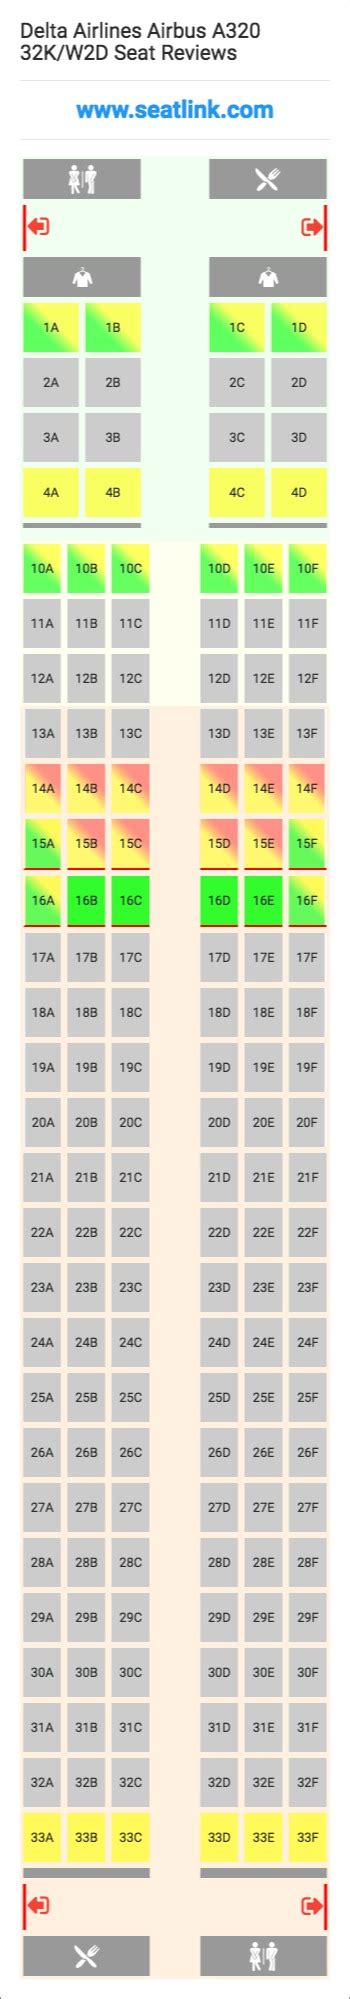 Delta Airbus A320neo Seat Map Image To U